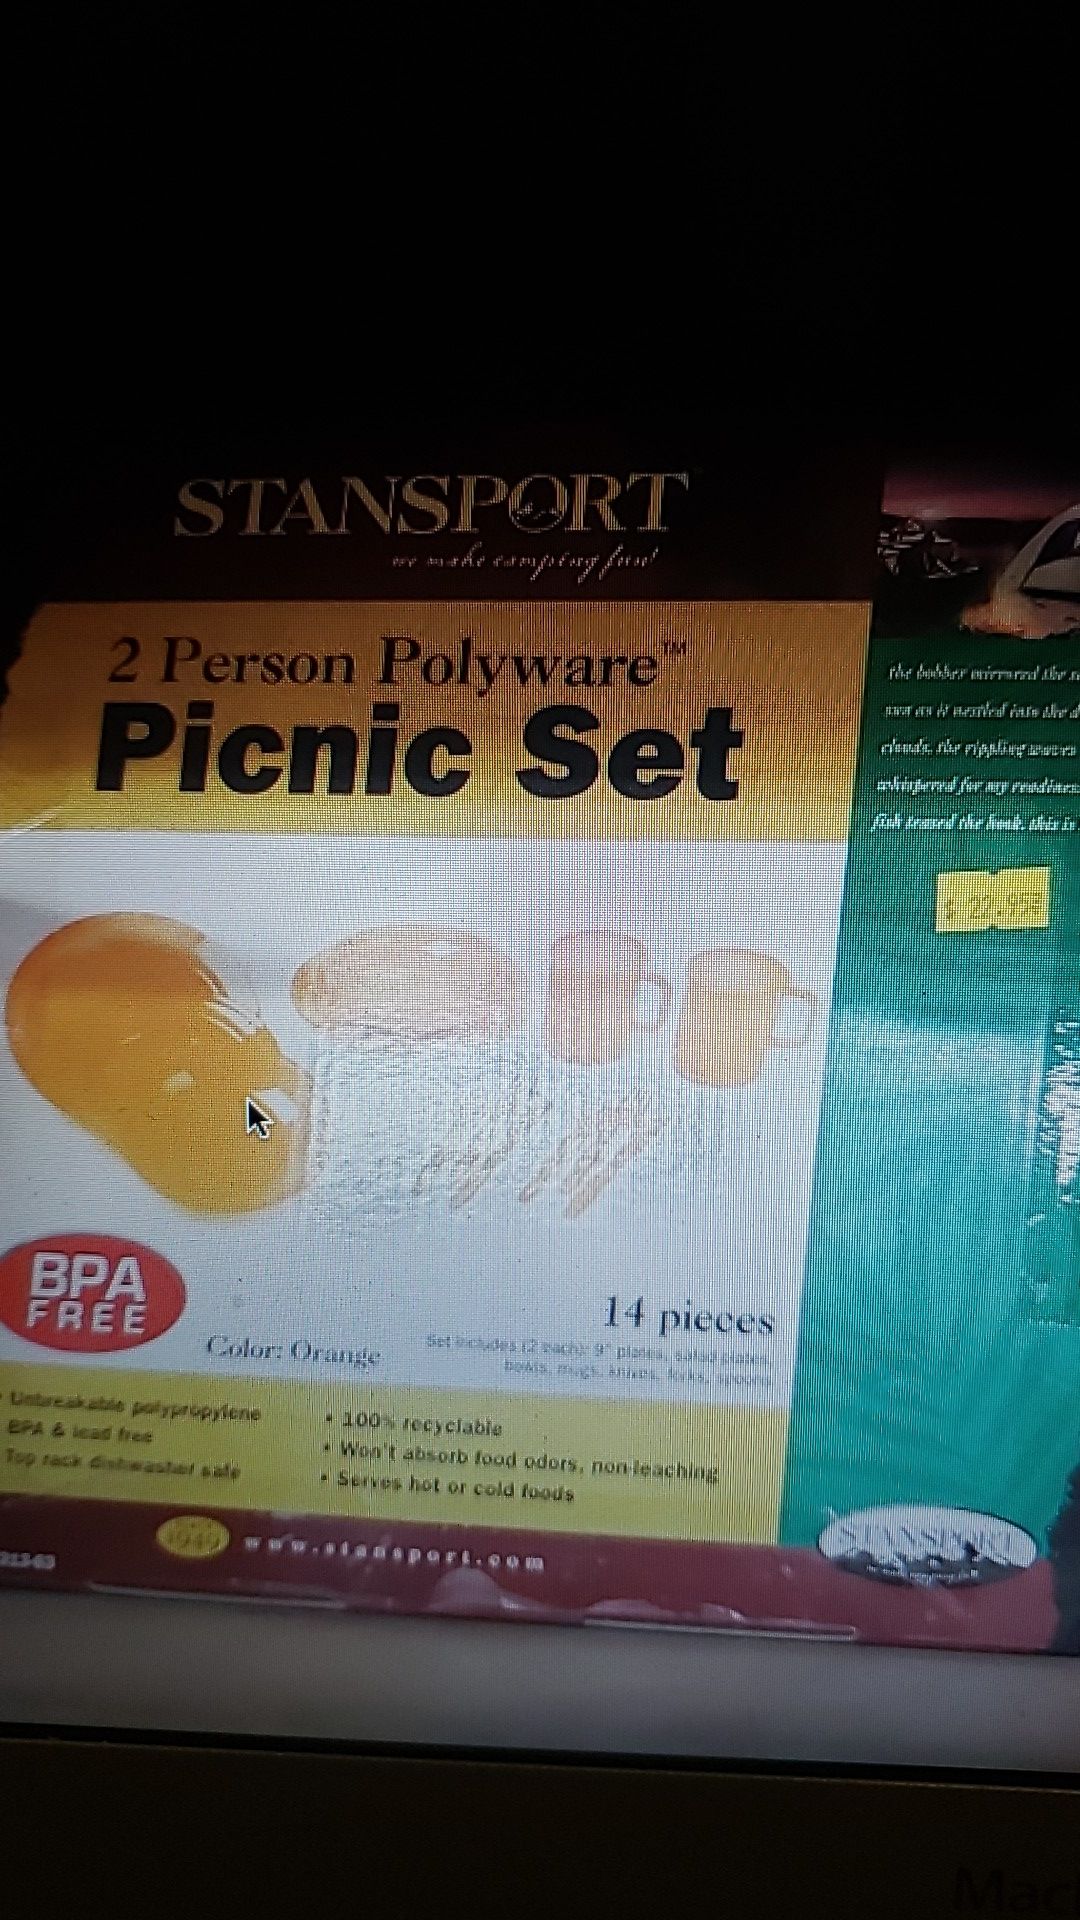 Stansport 2 person 14 piece polyware picnic set